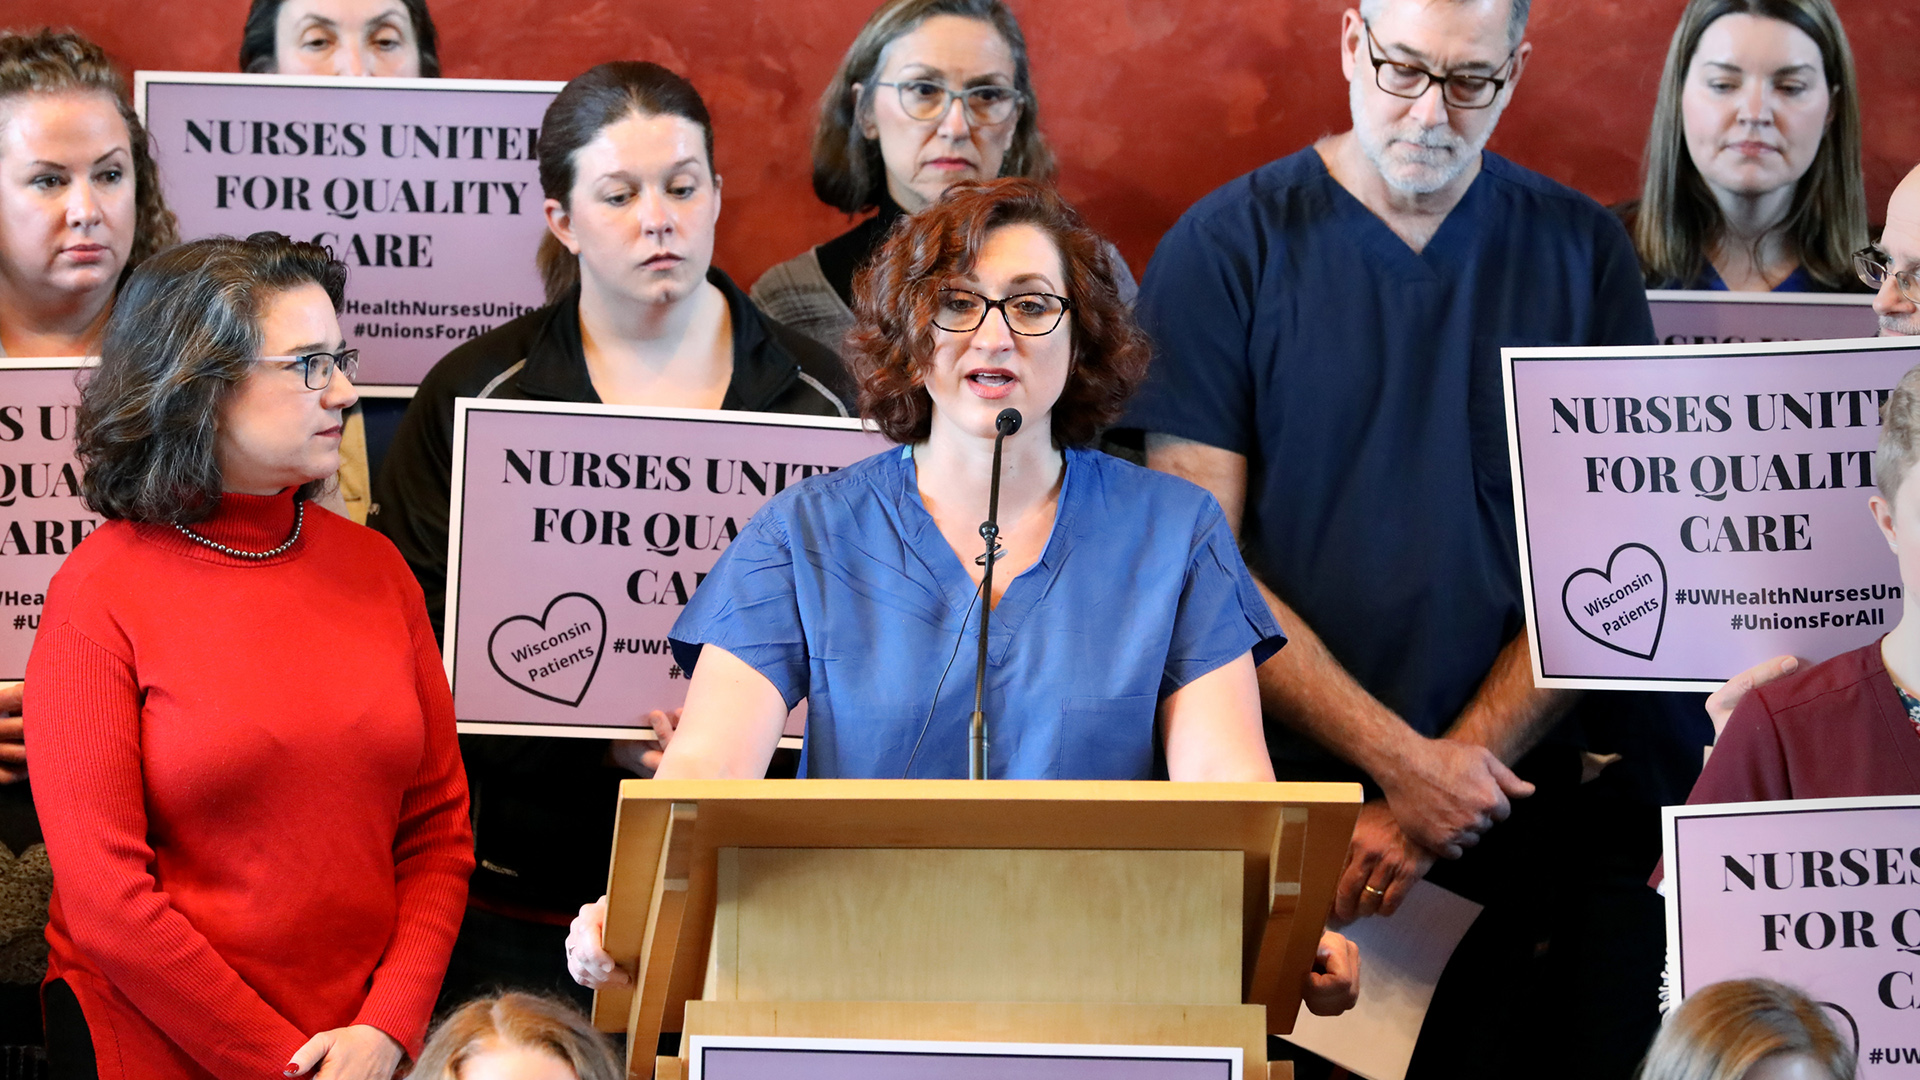 Mariah Clark stands behind a podium and speaks into a microphone, with other people standing on the sides and in the background, with several holding signs that read "Nurses United for Quality Care."